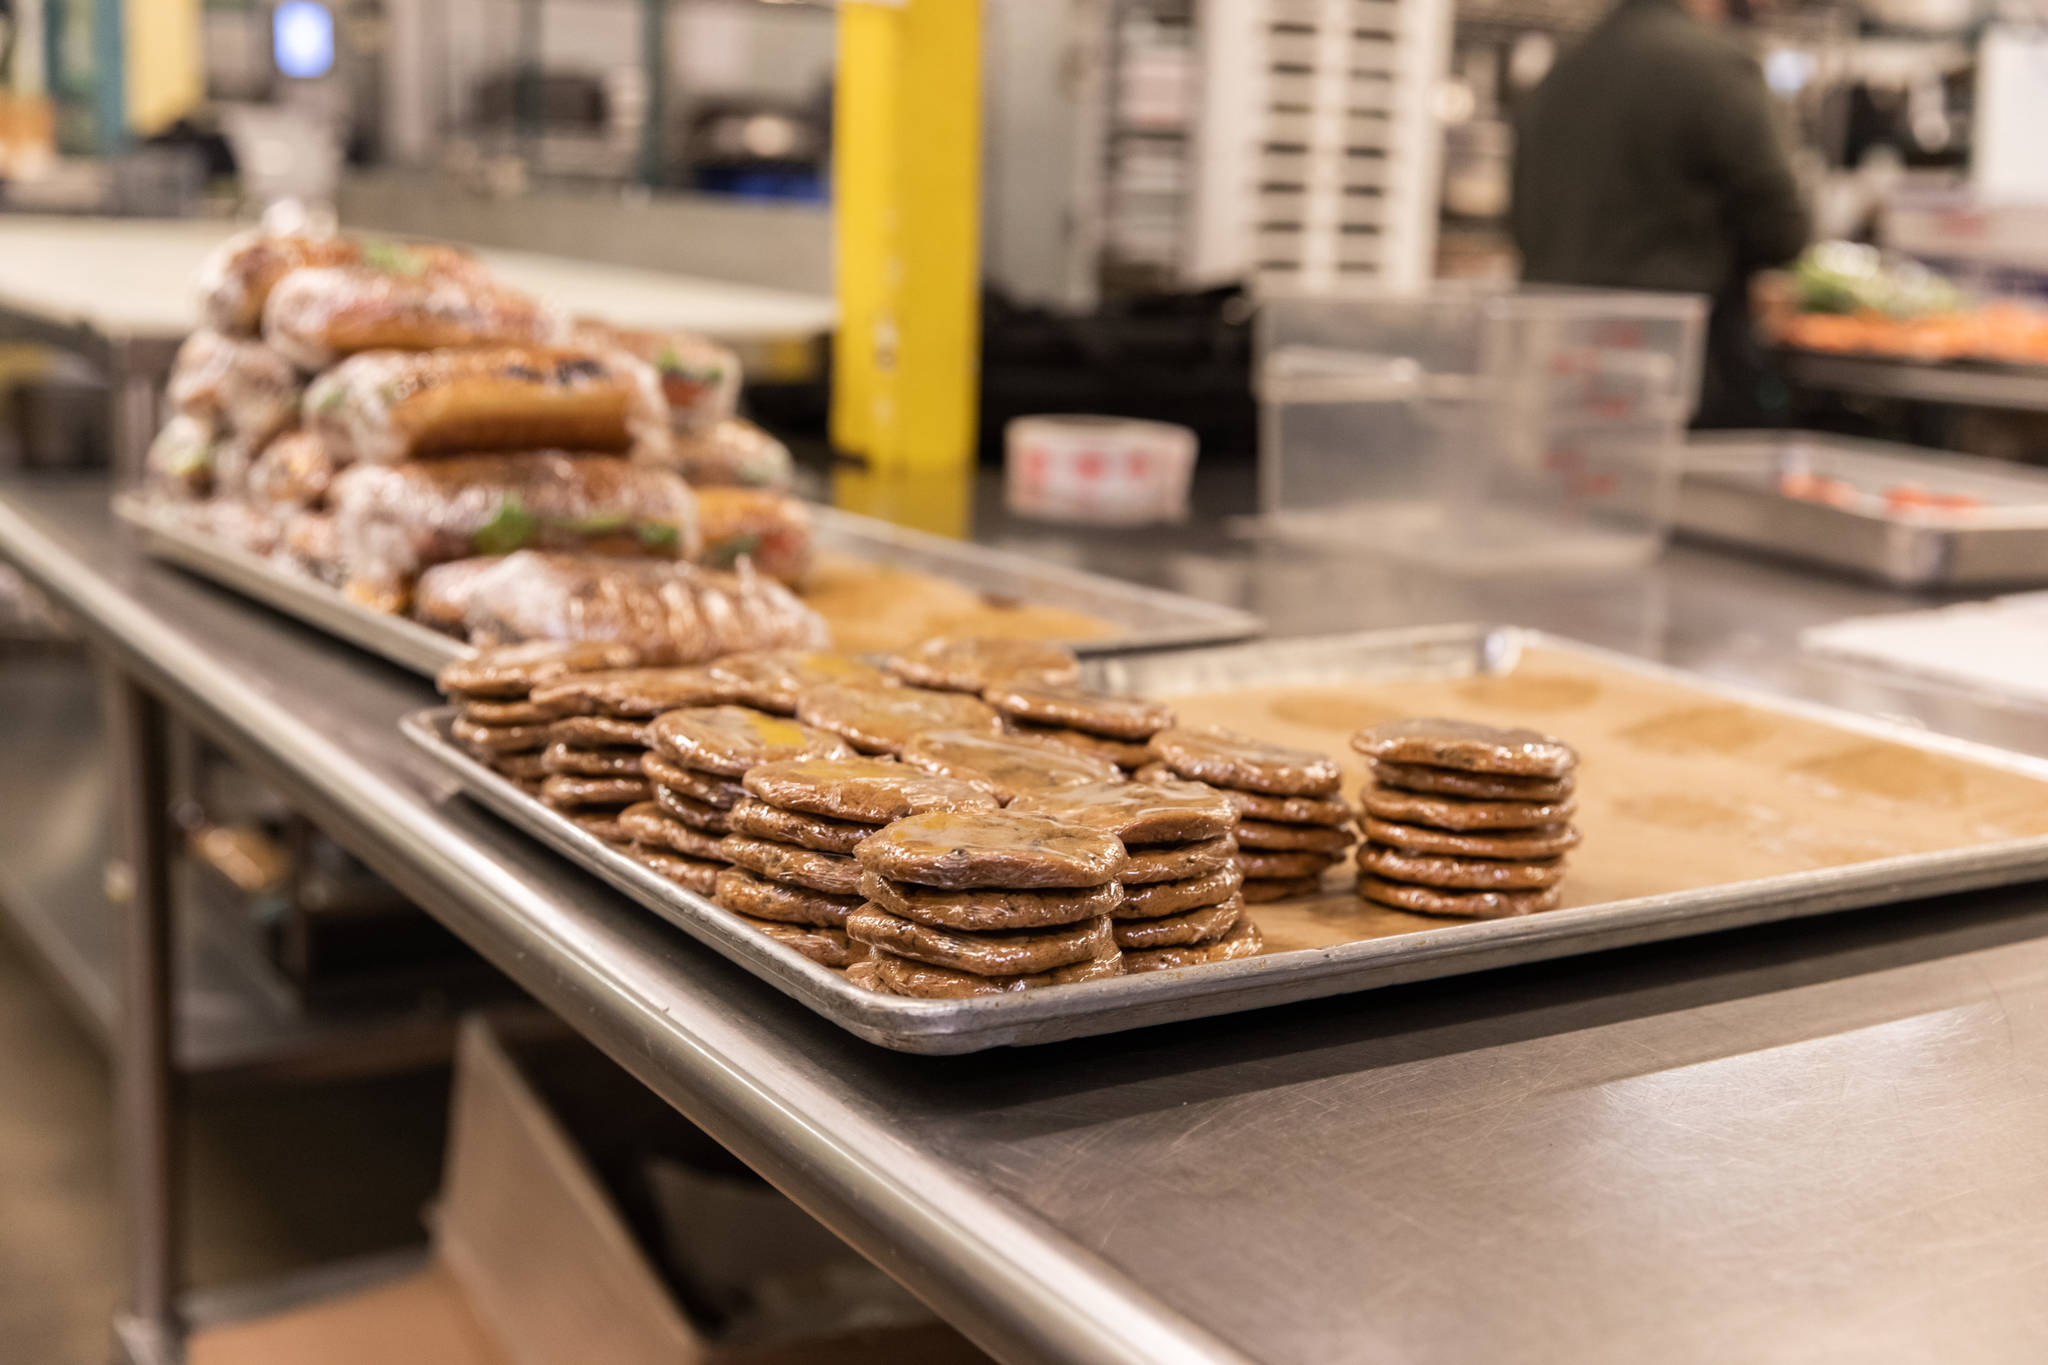 Fresh sandwiches and cookies are individually wrapped before being placed in boxes and delivered to first responders. Photo courtesy of Hannah Sheil